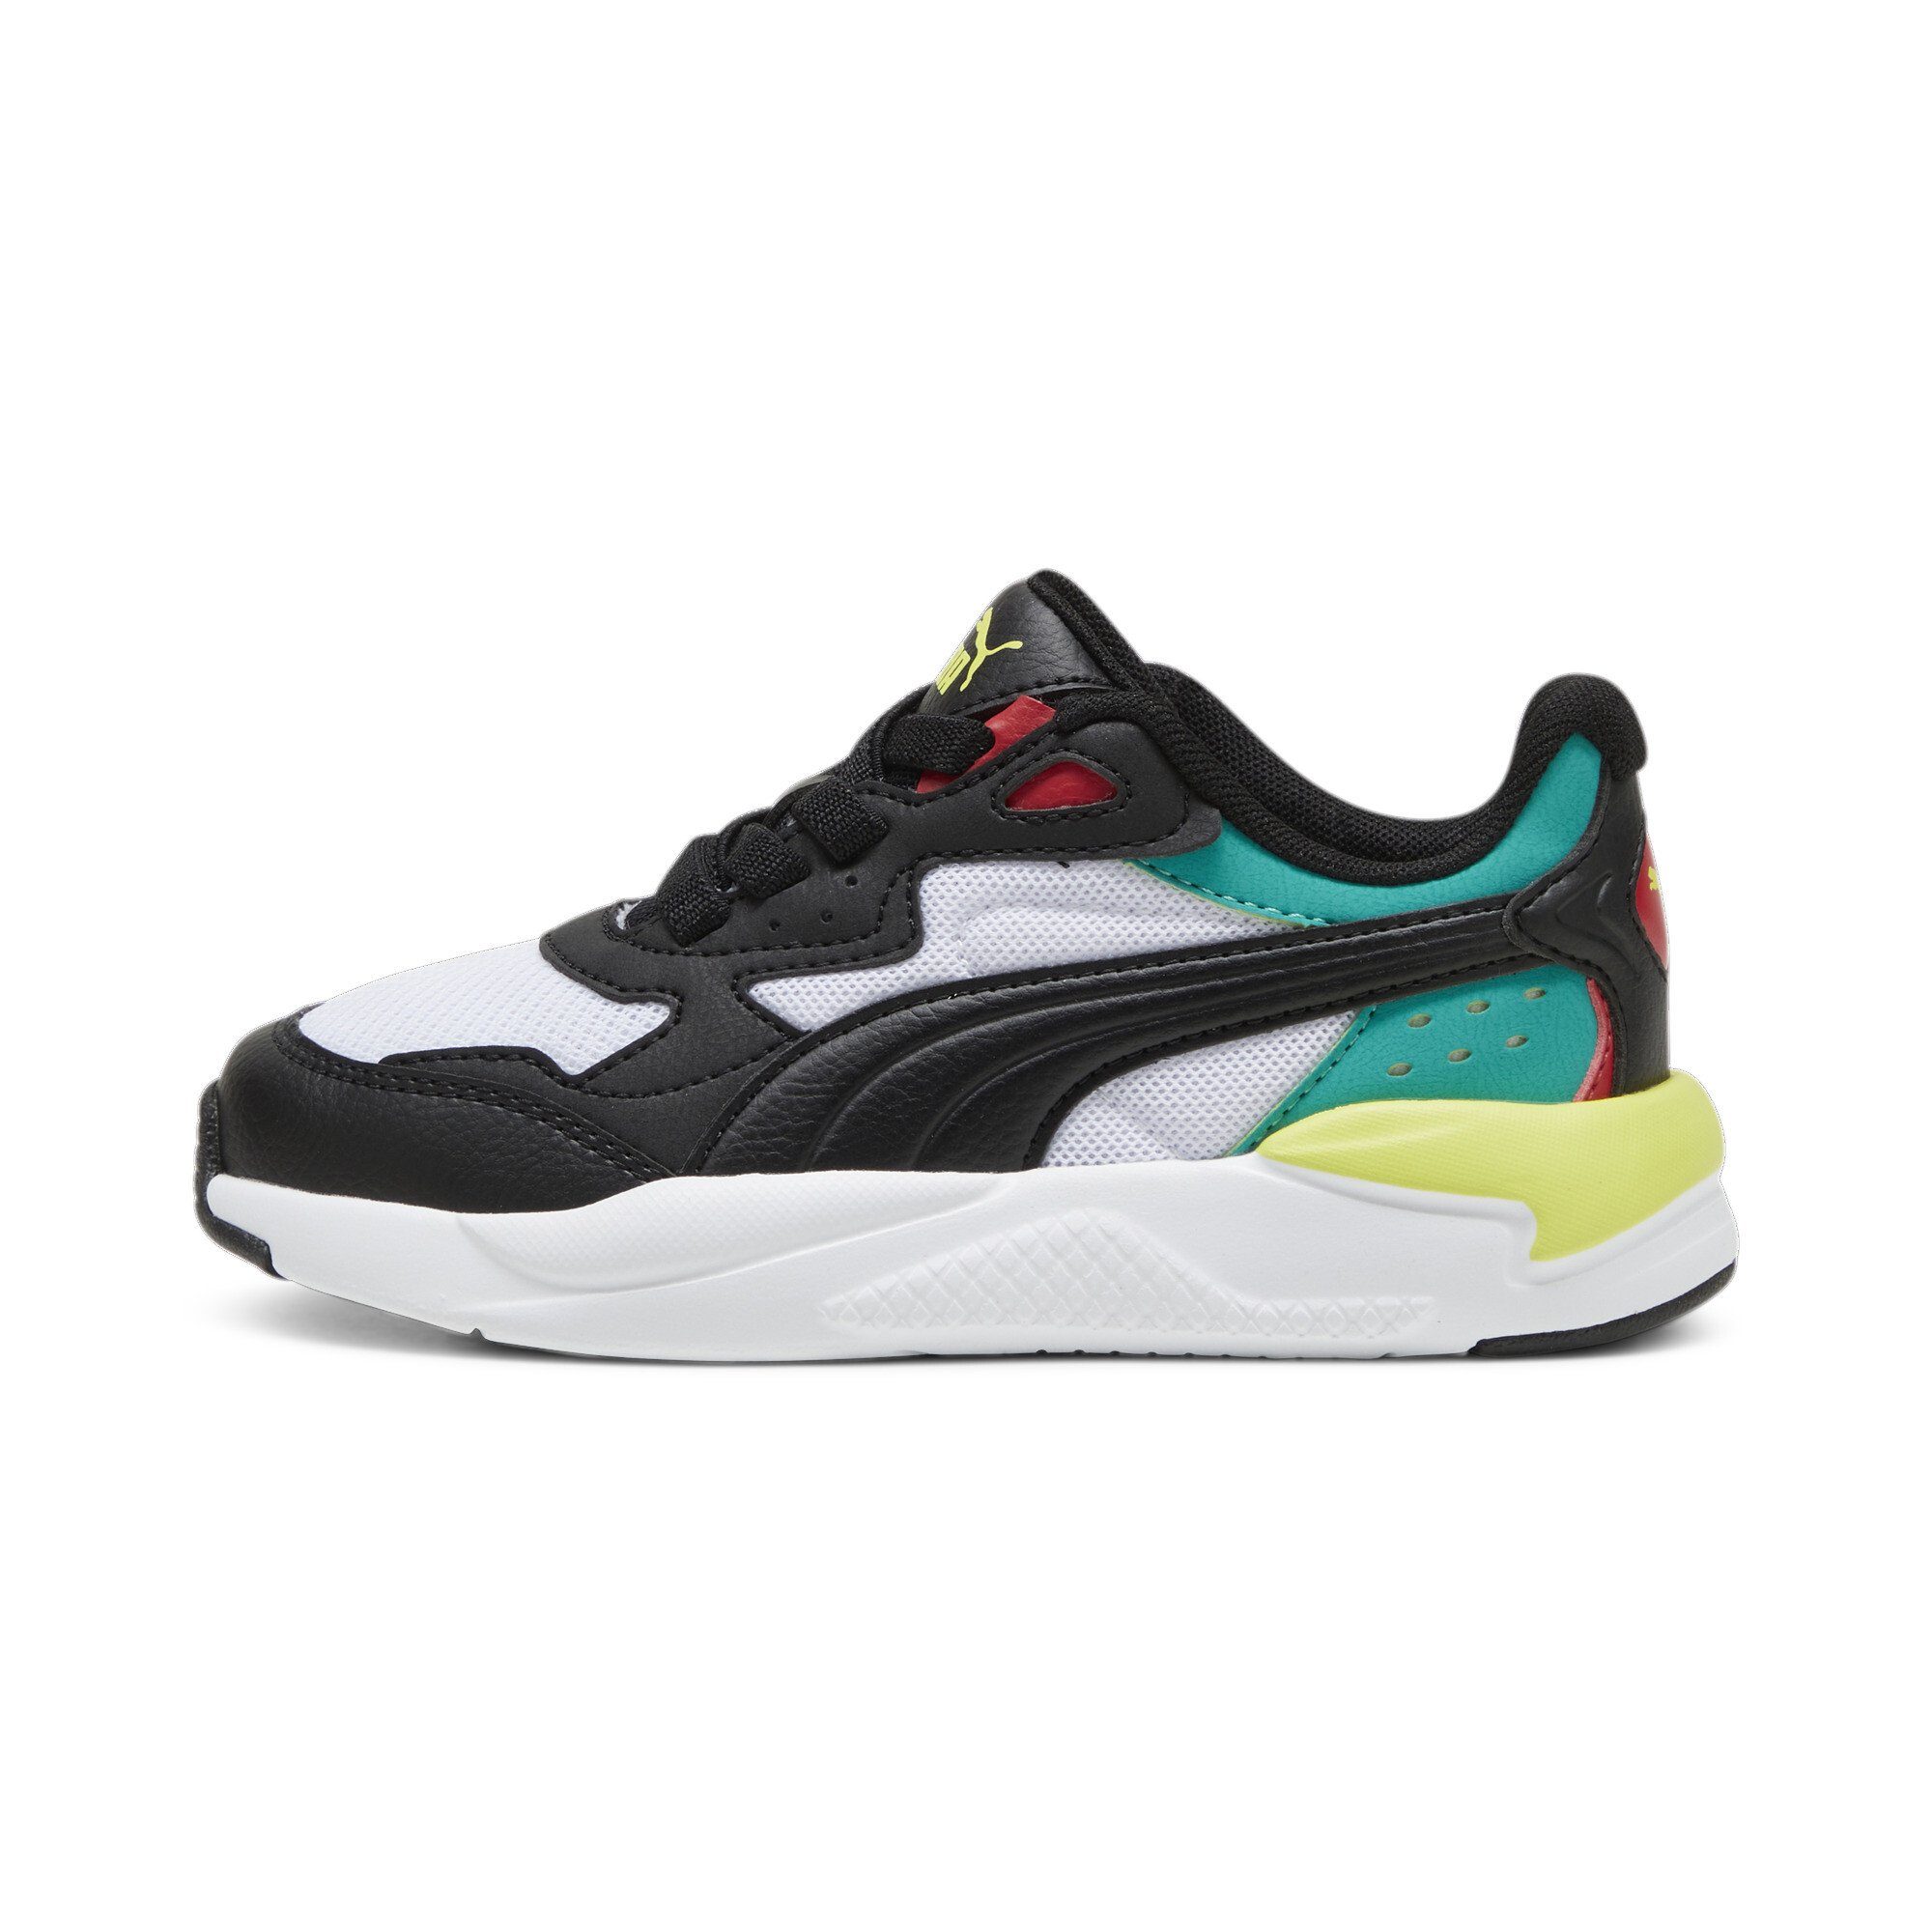 PUMA X-Ray Speed AC Black Sparkling Sneakers White Green Sneaker Club Red